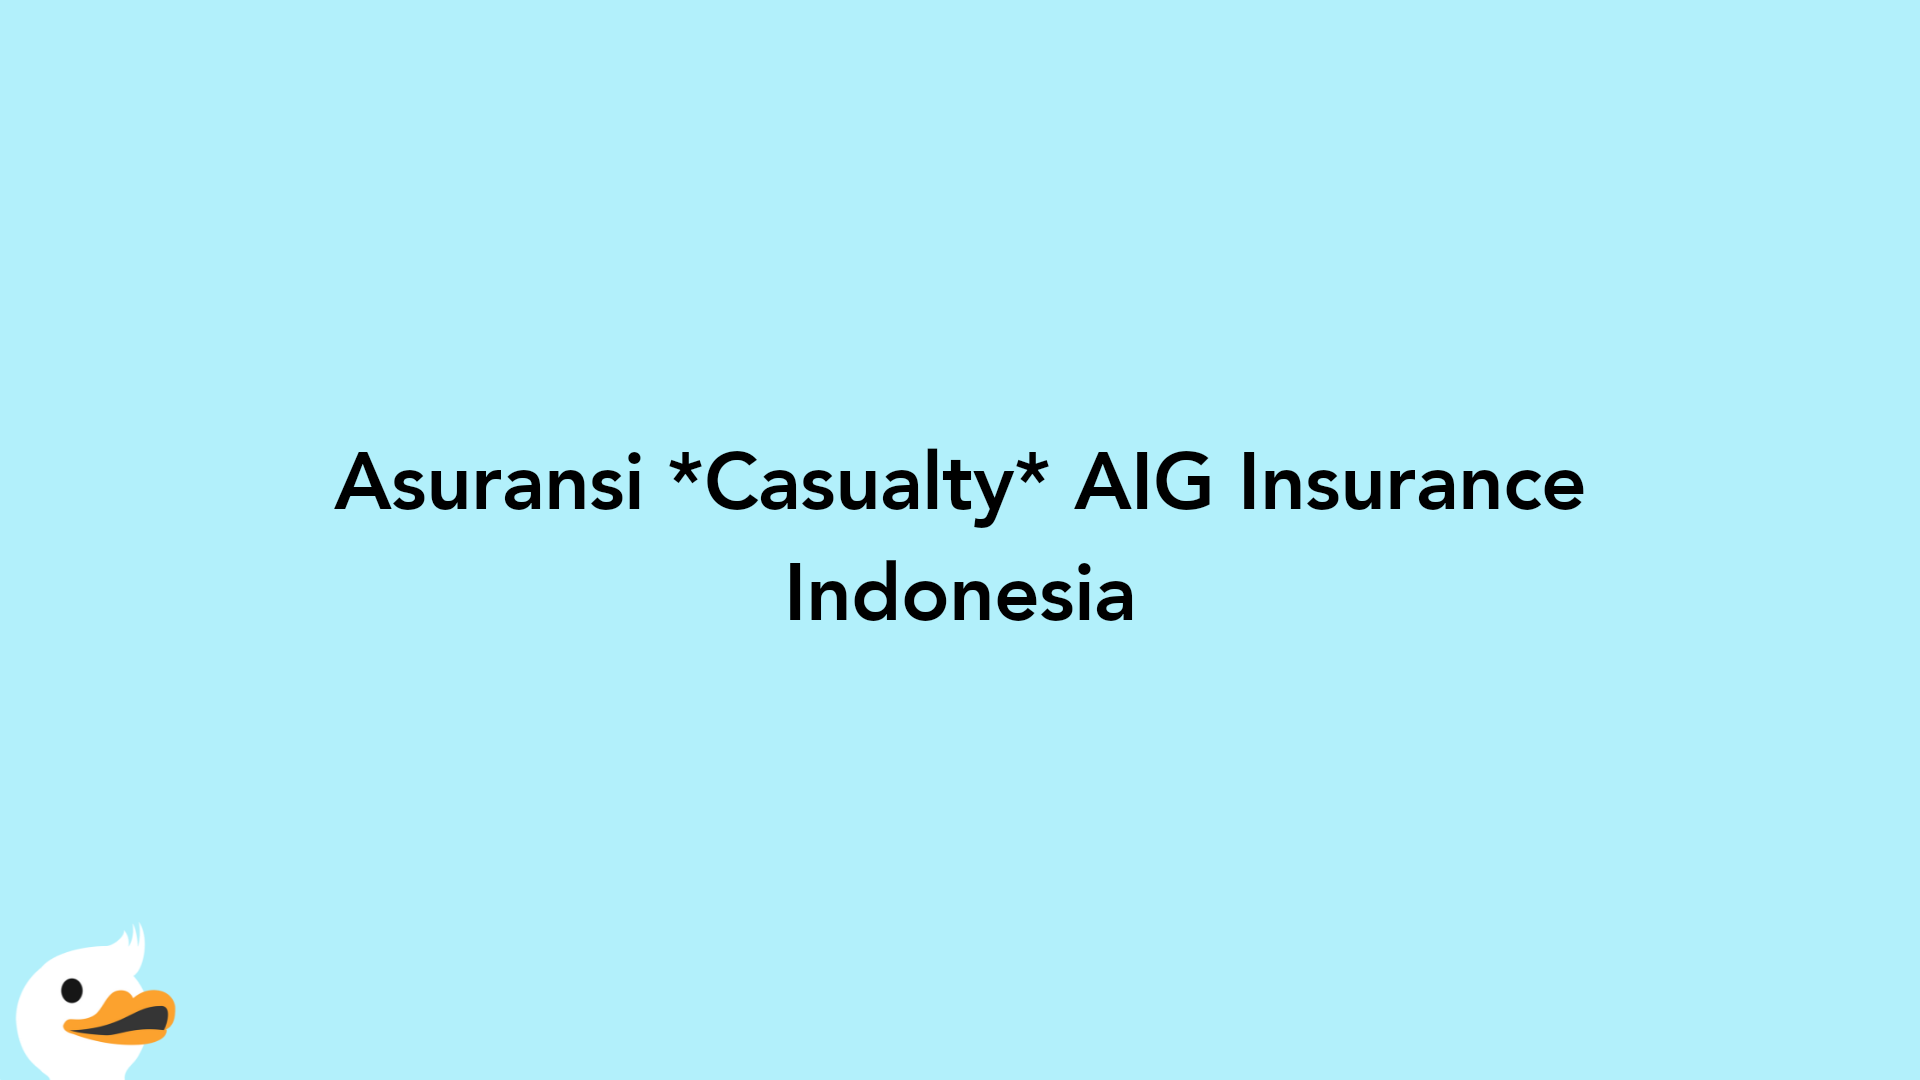 Asuransi Casualty AIG Insurance Indonesia